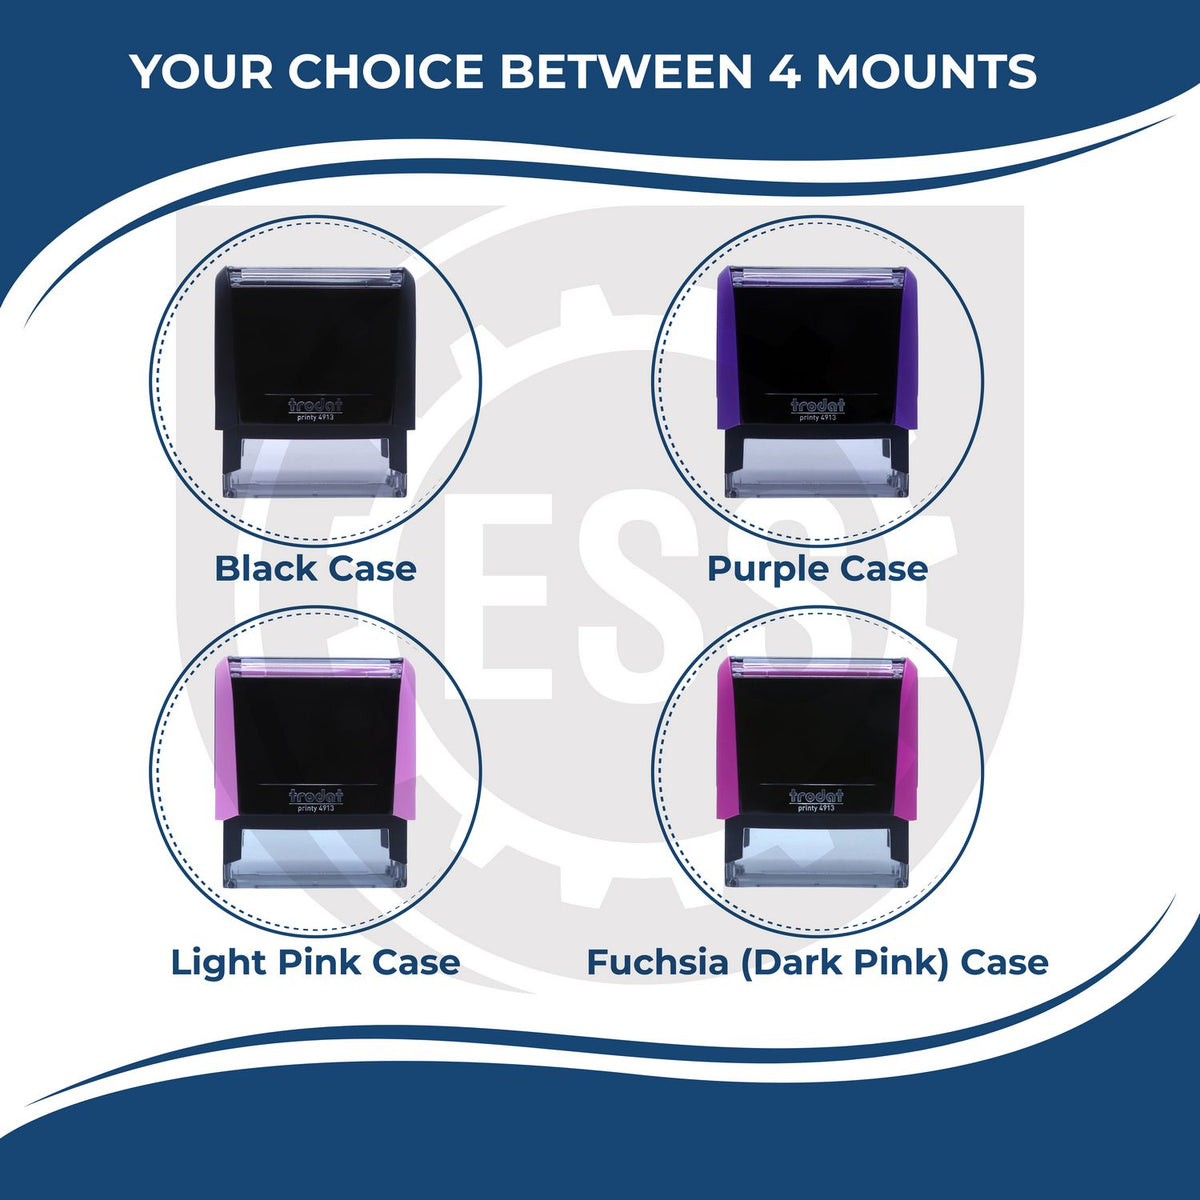 A picture of different colored mounts for the Self-Inking Rectangular Washington Notary Stamp featurning a Red, Blue or Black Mount